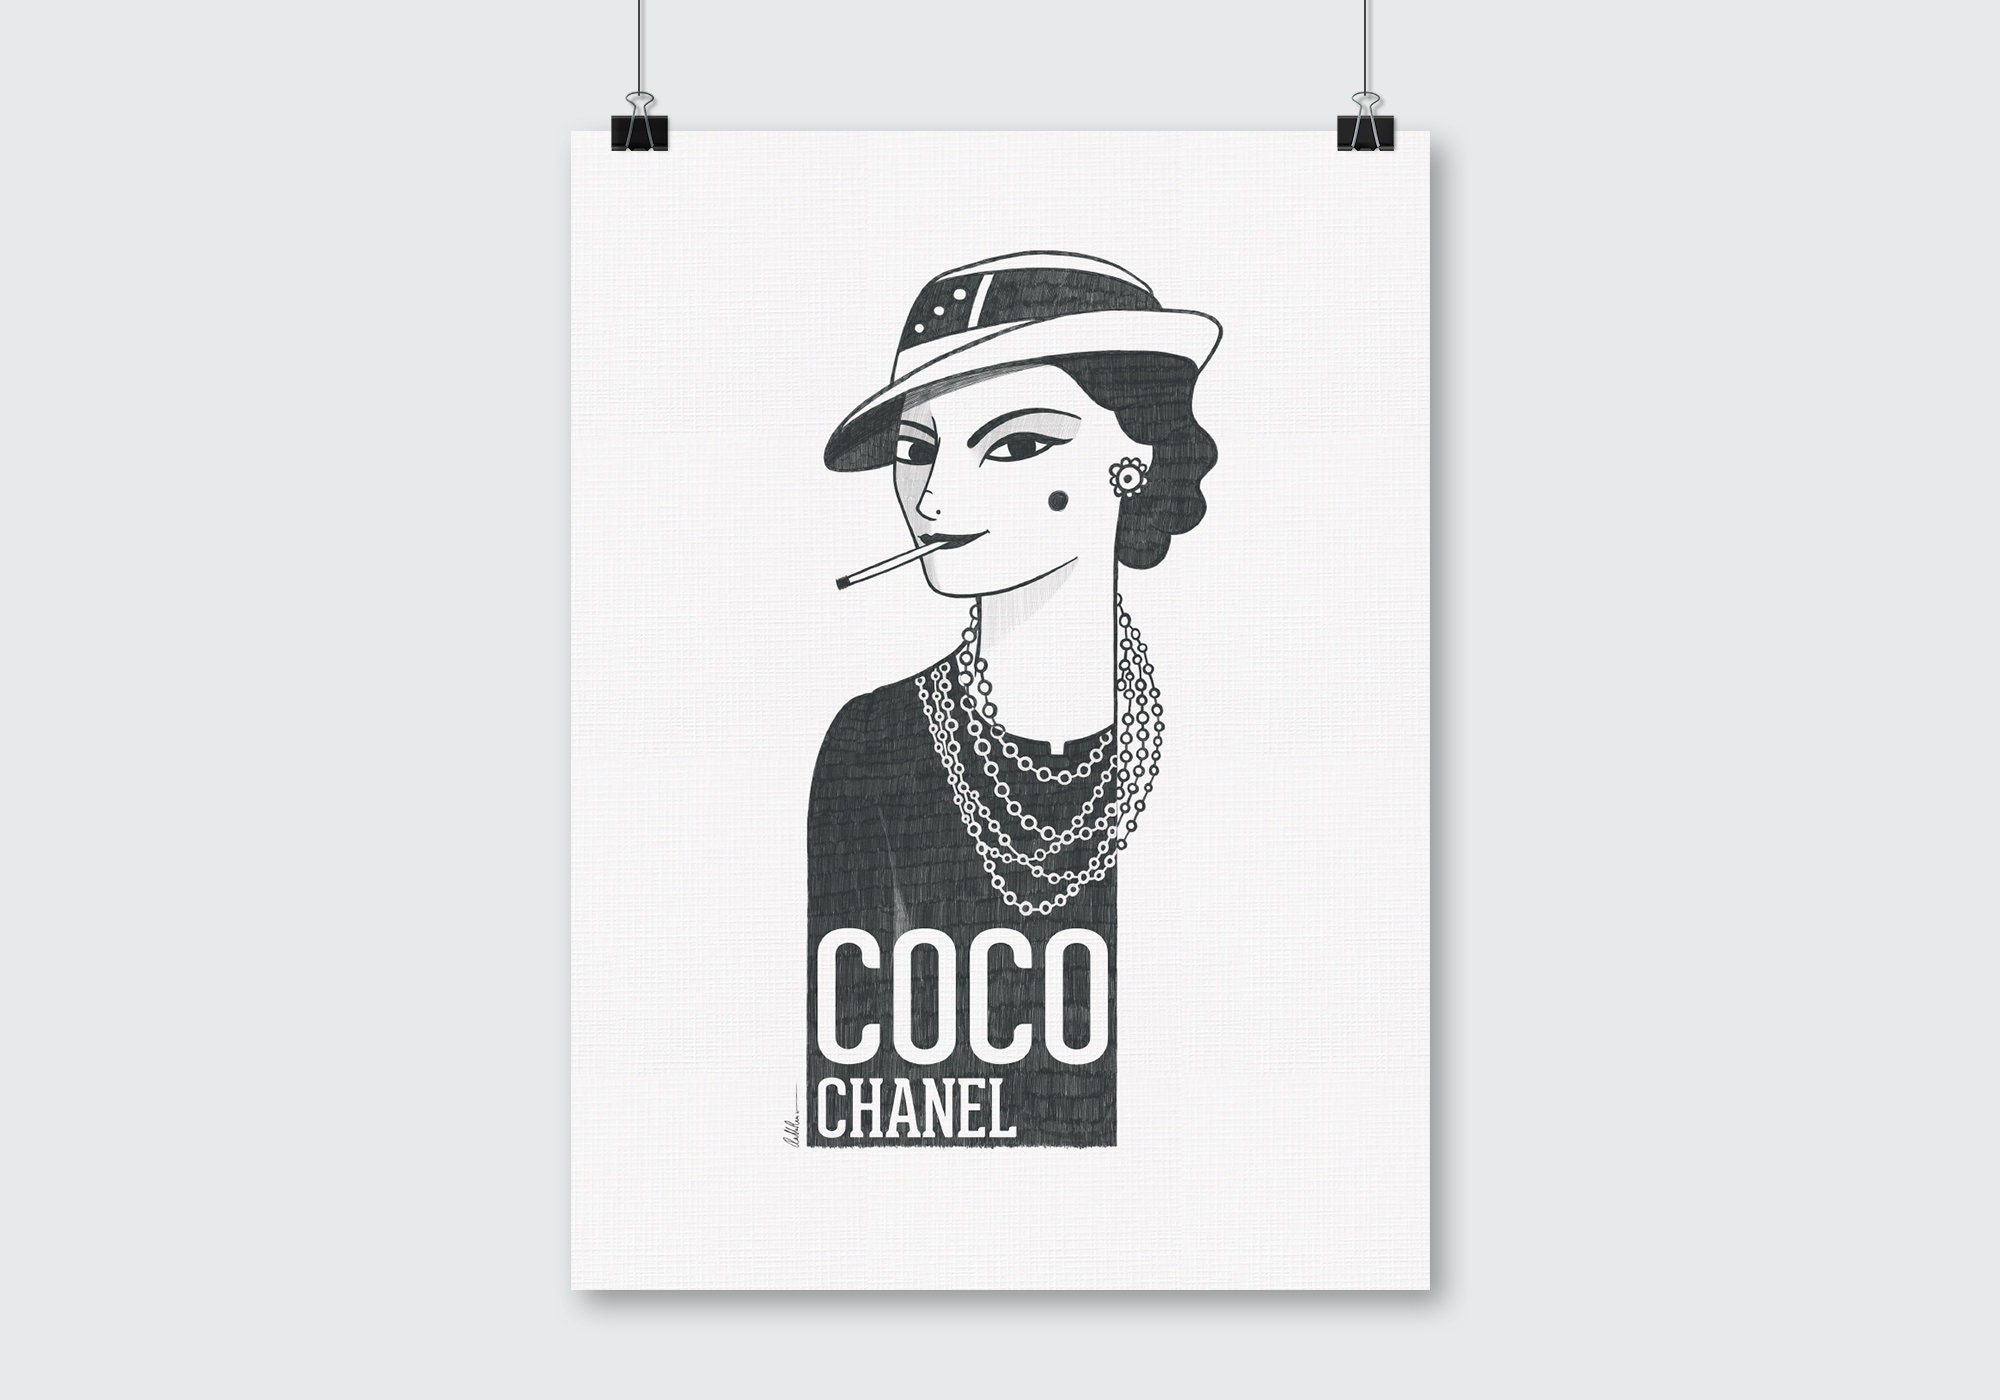 Monochrome Fashion Prints - Set of 4 (8x10 Inches) Vogue Coco Chanel  Inspirational Motivational Black and White Typography Quotes Wall Art Decor